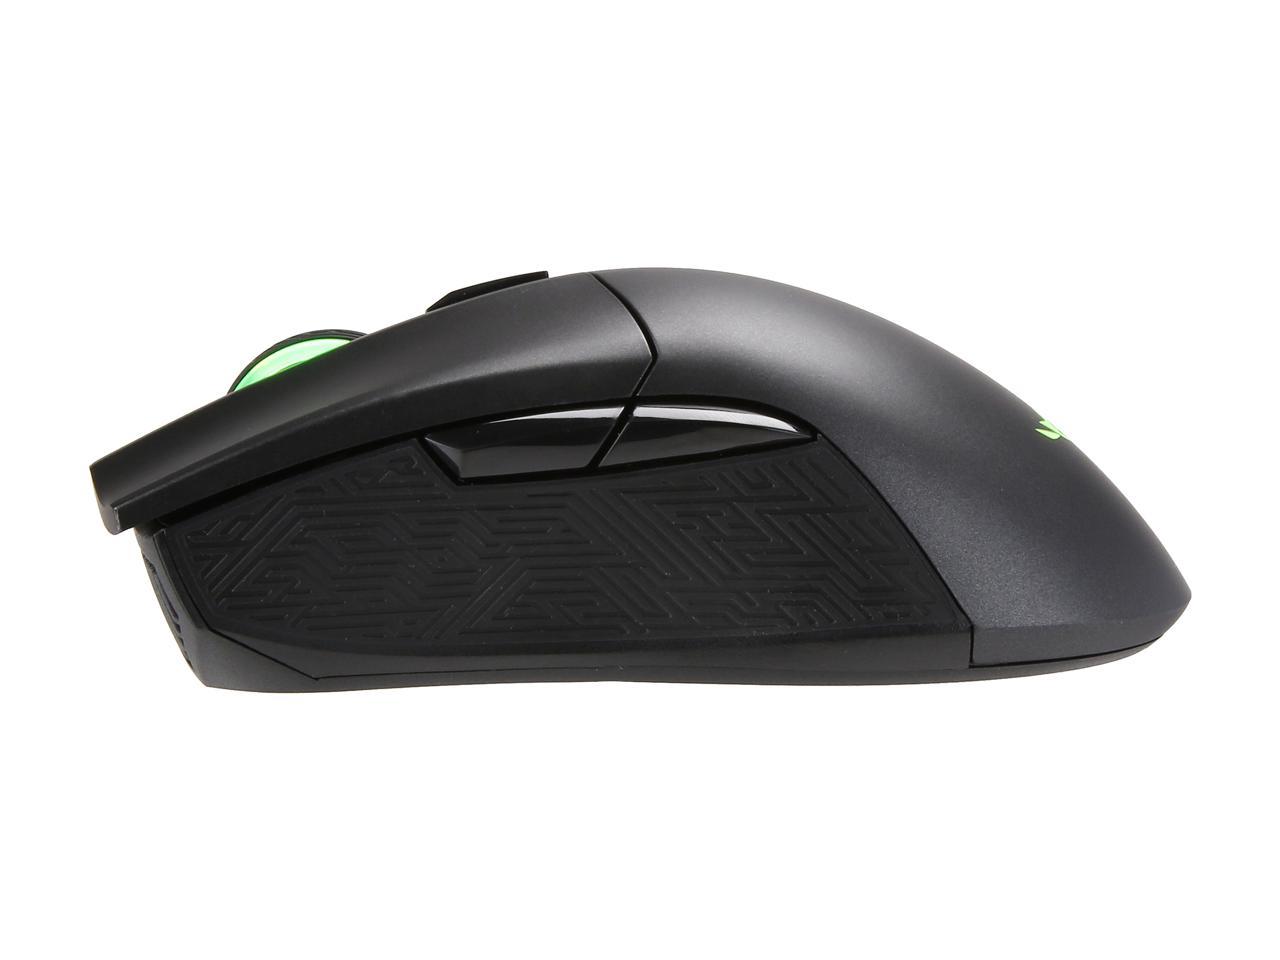 ASUS ROG Gladius II Wireless Optical Ergonomic FPS Gaming Mouse featuring 16000 dpi Optical, 50G Acceleration, 400 IPS sensor, swappable Omron switches, and ASUS Aura Sync RGB Lighting